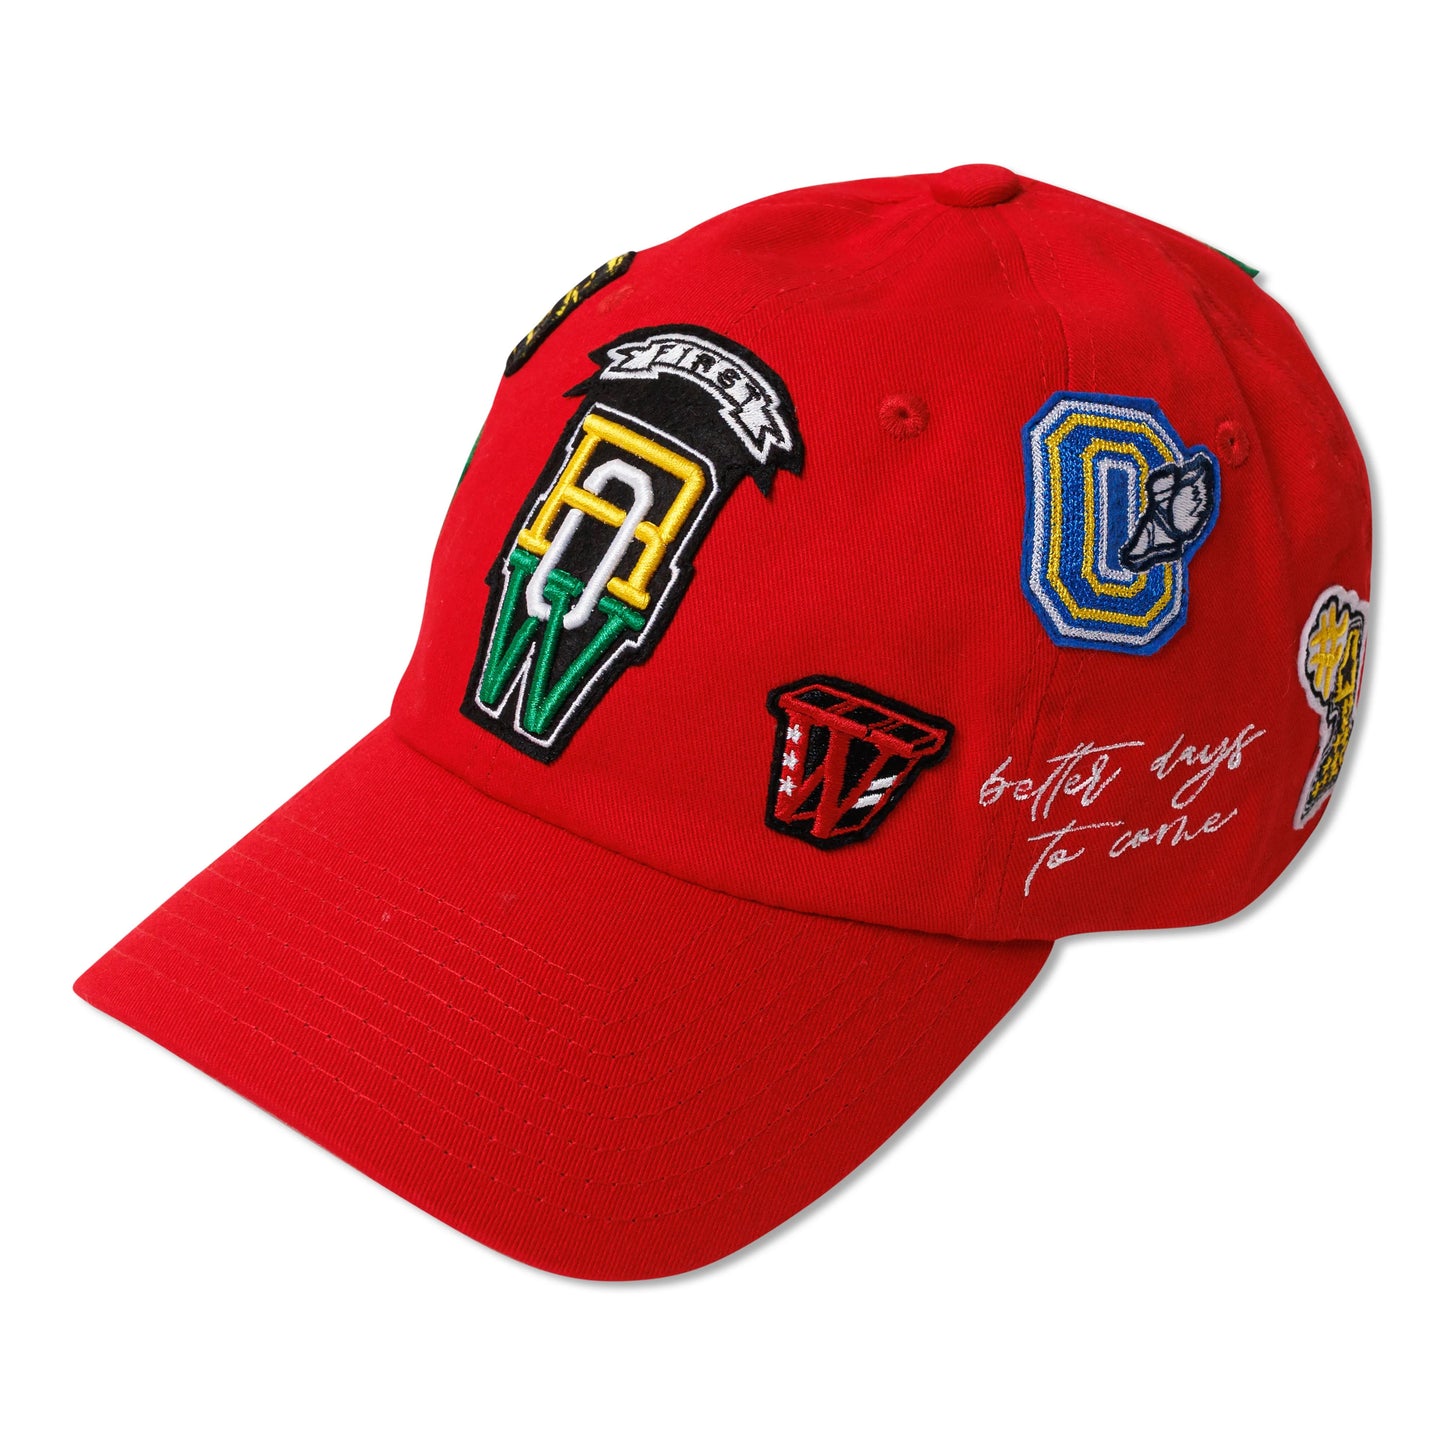 FIRST ROW Multi Patch Cap - Red